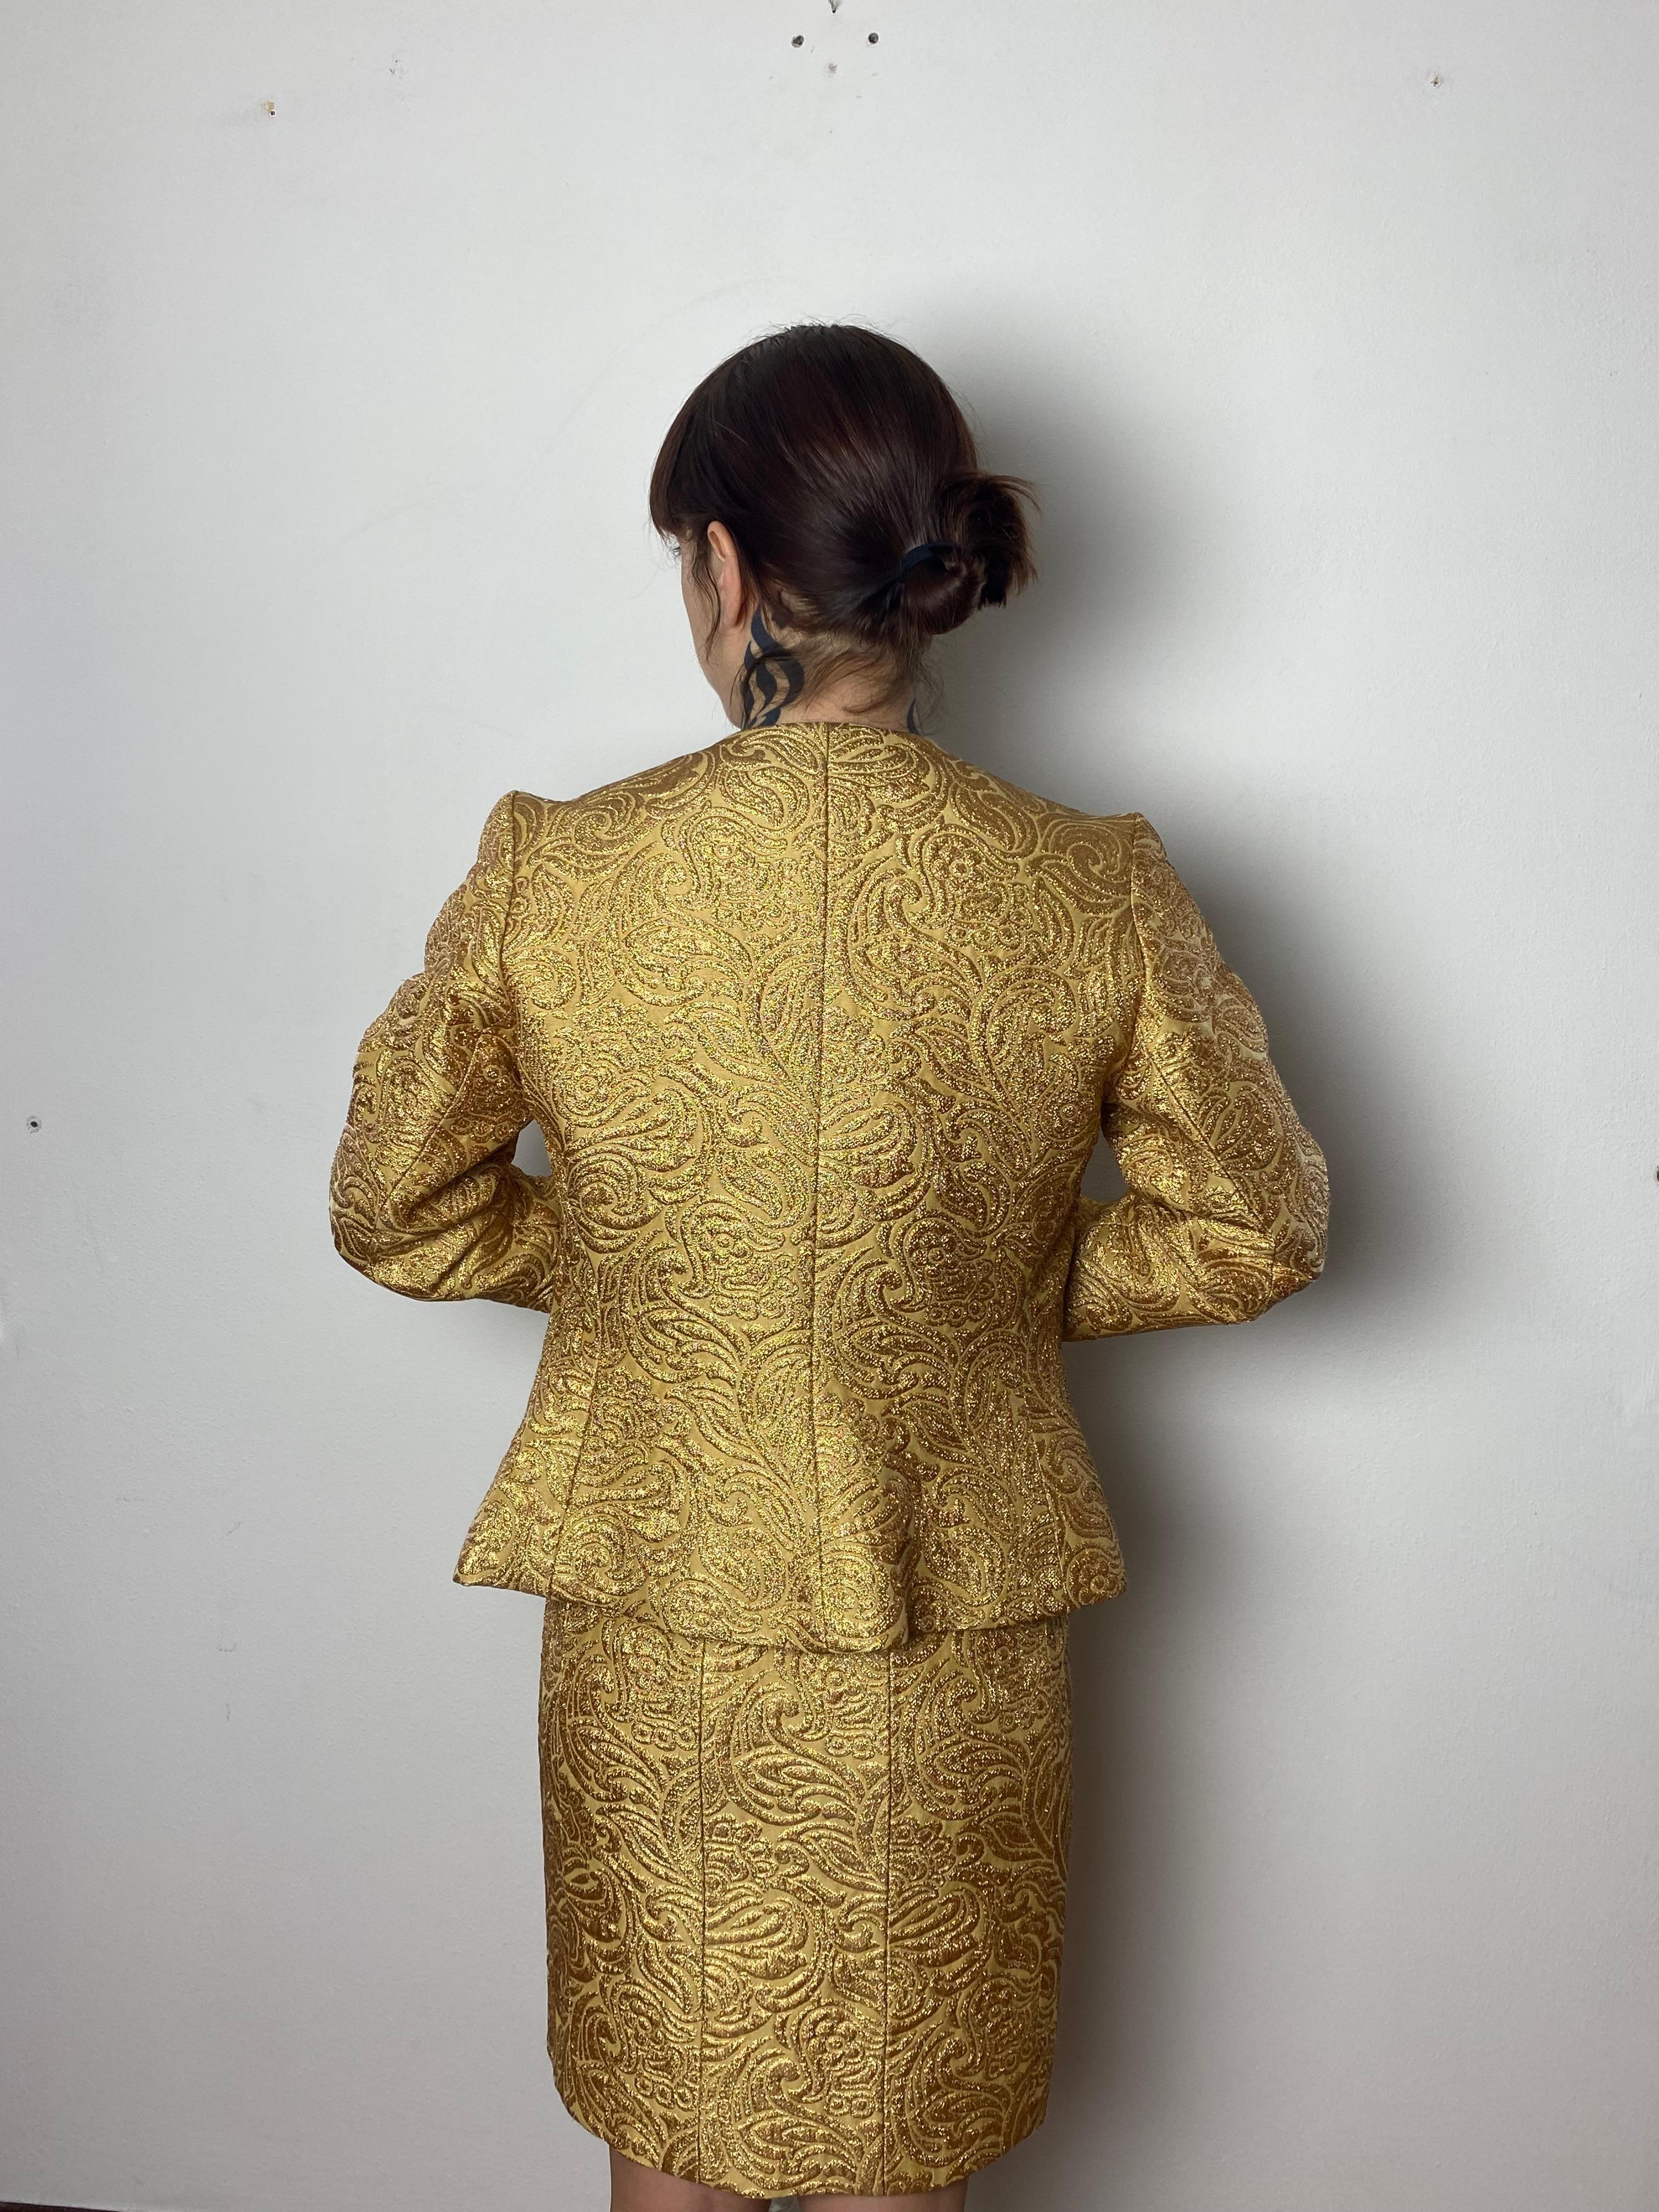 Sparkling brocade jacket in gold jacuqrd pattern from Saint Laurent Rive Gauche. Shaped, fitted silhouette with high neckline Textured floral brocade Front opening with 7 matte gold twist buttons Shaped princess seam with slightly flared peplum